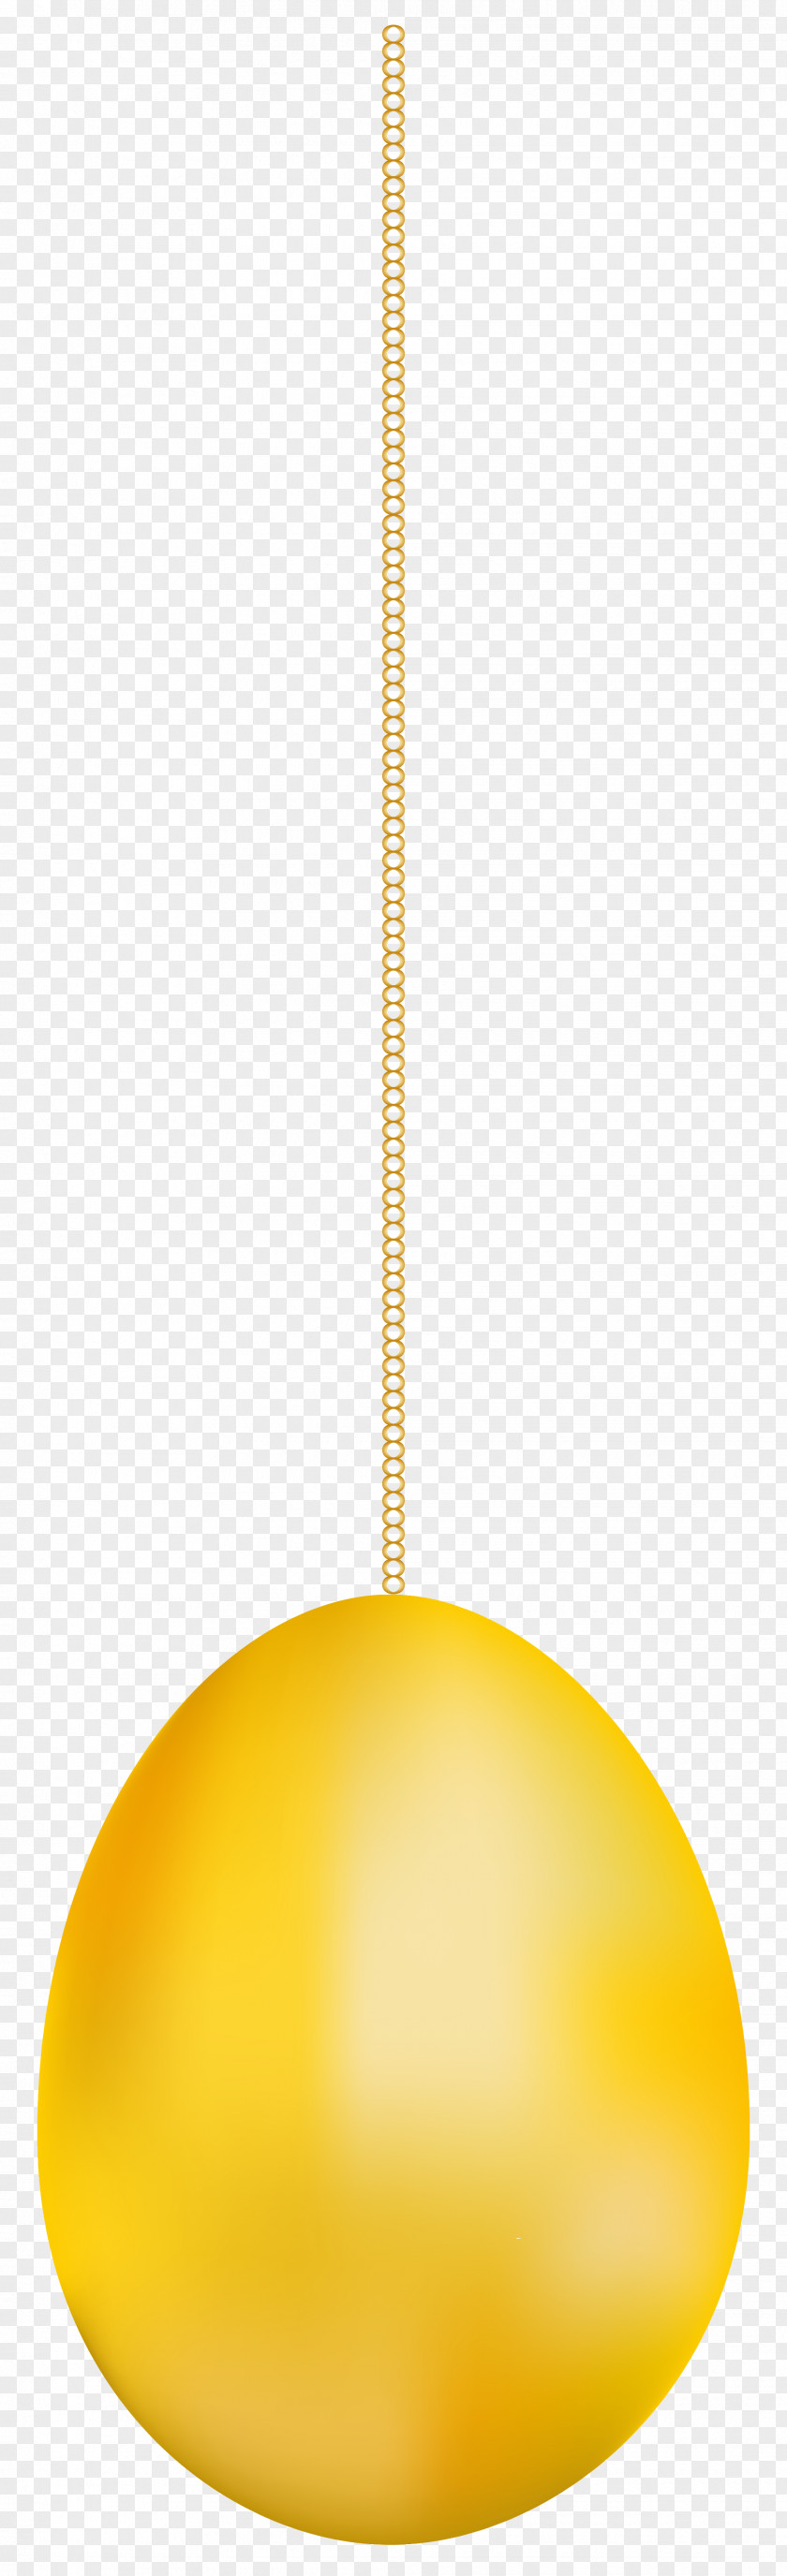 Hanging Gold Easter Egg Transparent Clip Art Image Yellow PNG